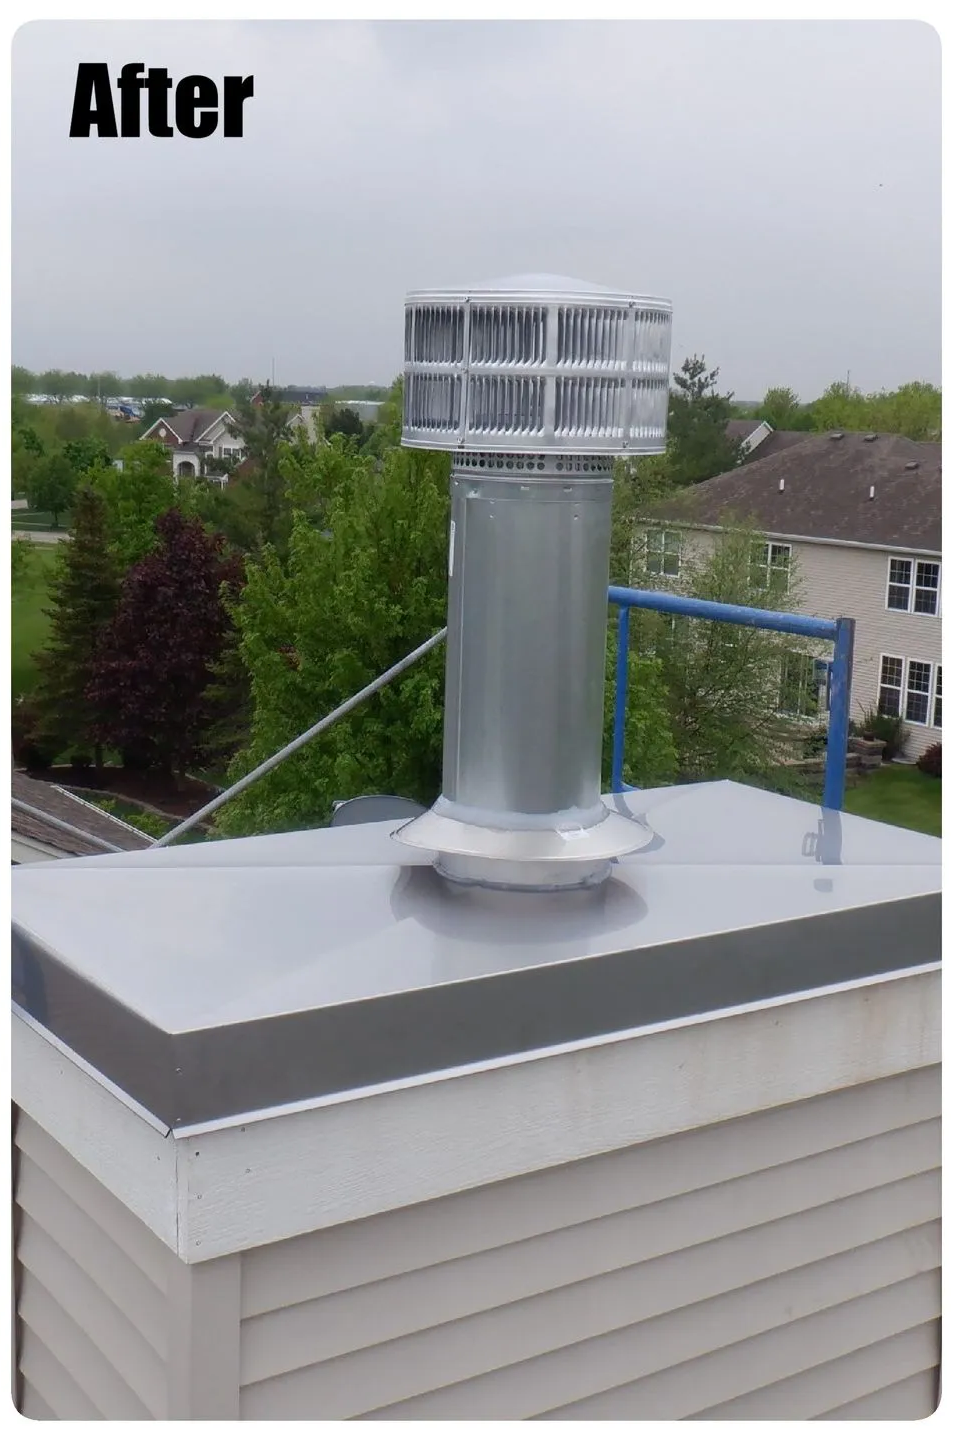 Chimney On Top Of A House - Elgin, IL - Valor Chimney Services Corporation